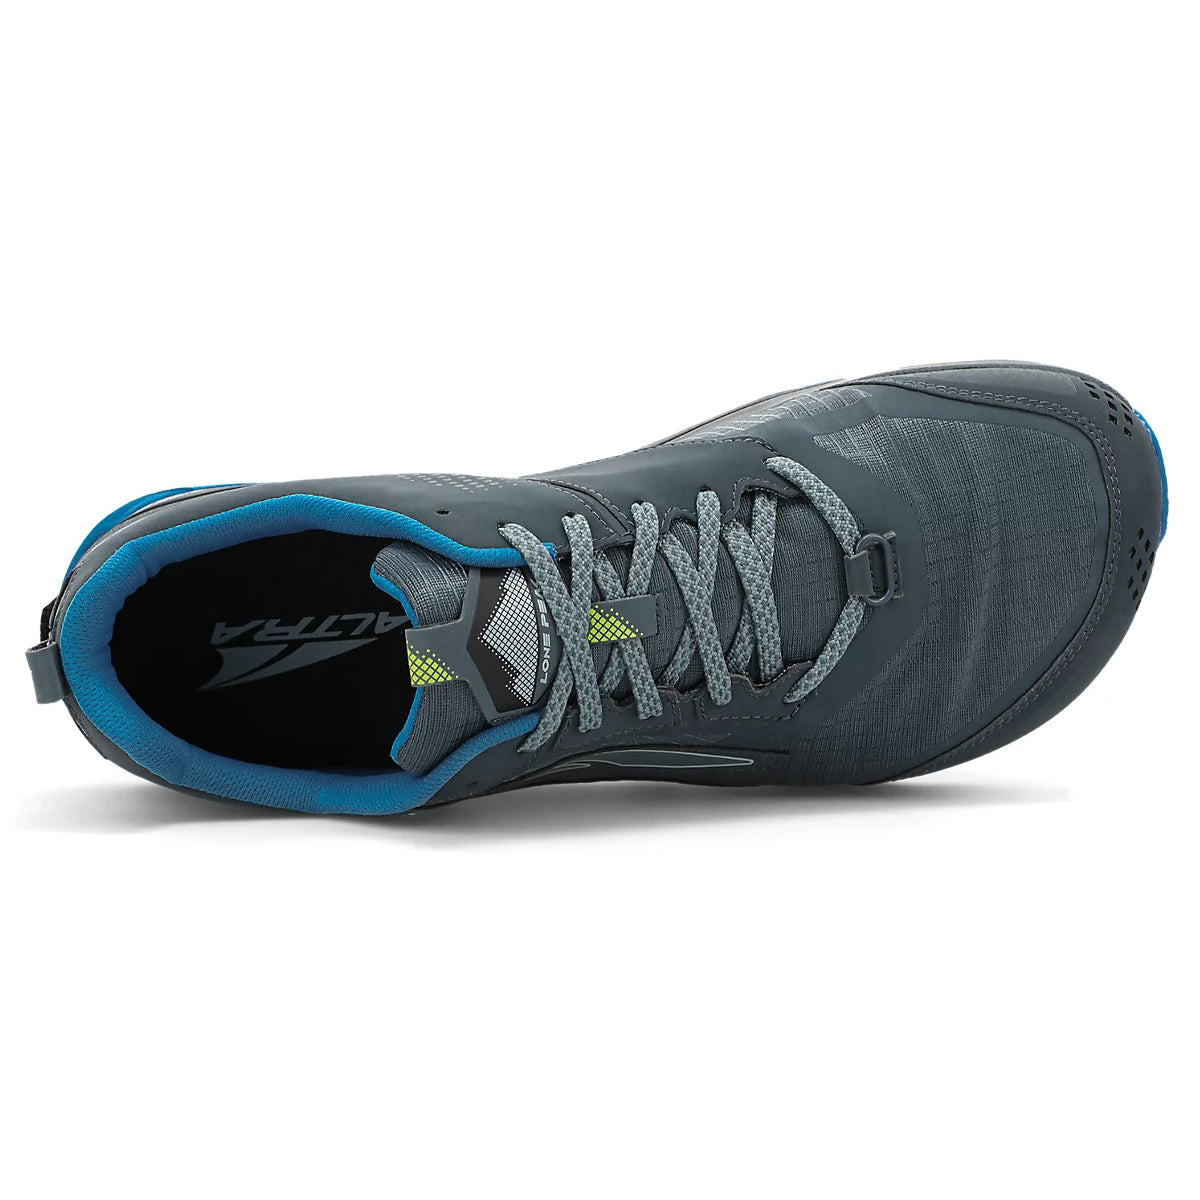 Altra Lone Peak 5 in Blue & Lime by GOHUNT | Altra - GOHUNT Shop